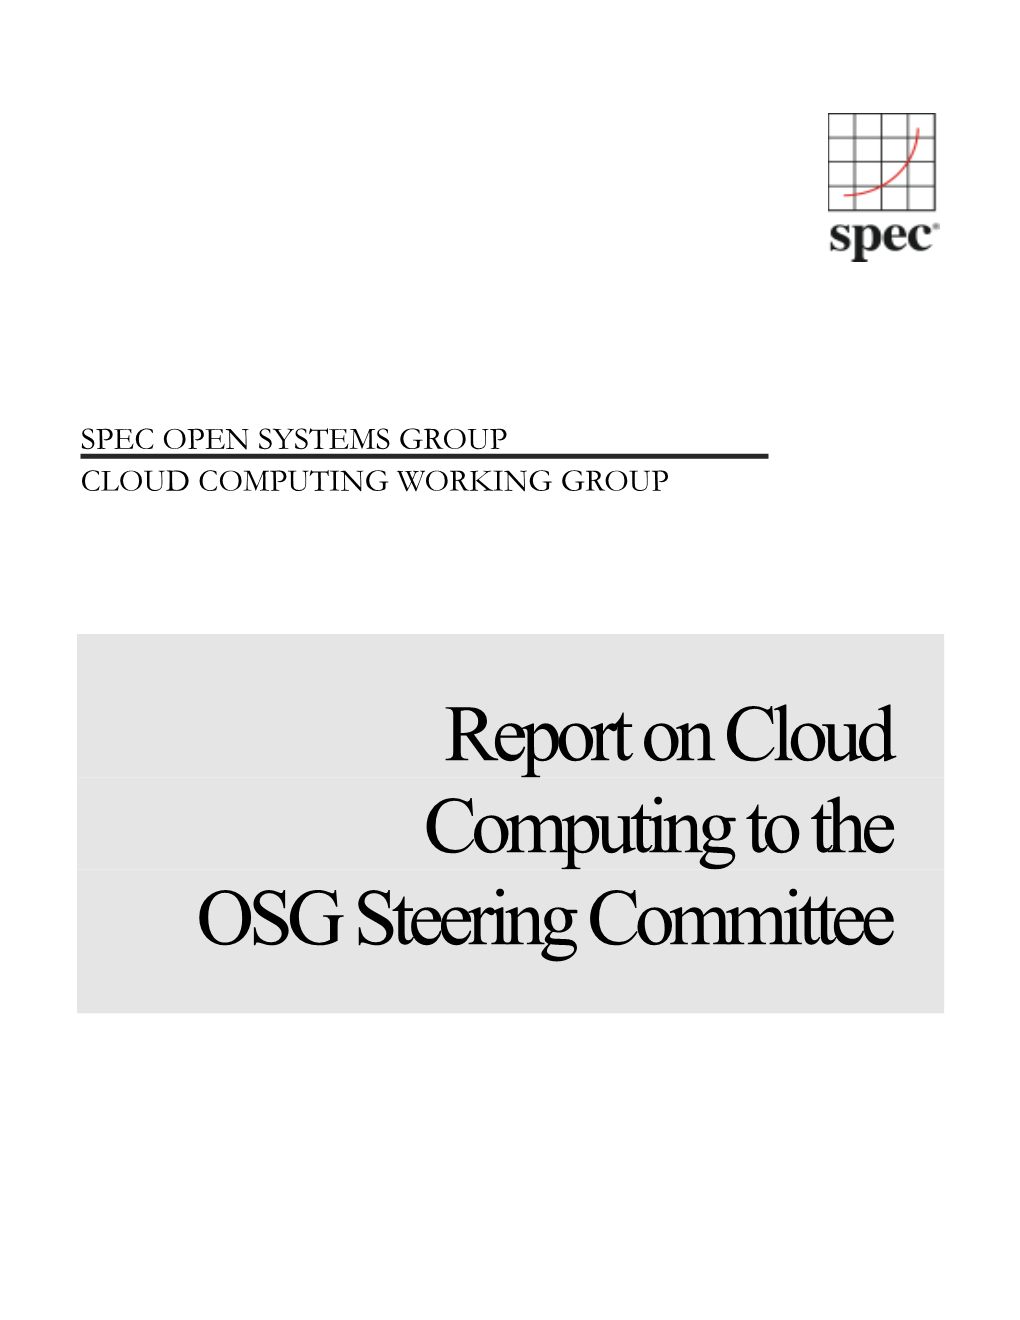 Report on Cloud Computing to the OSG Steering Committee